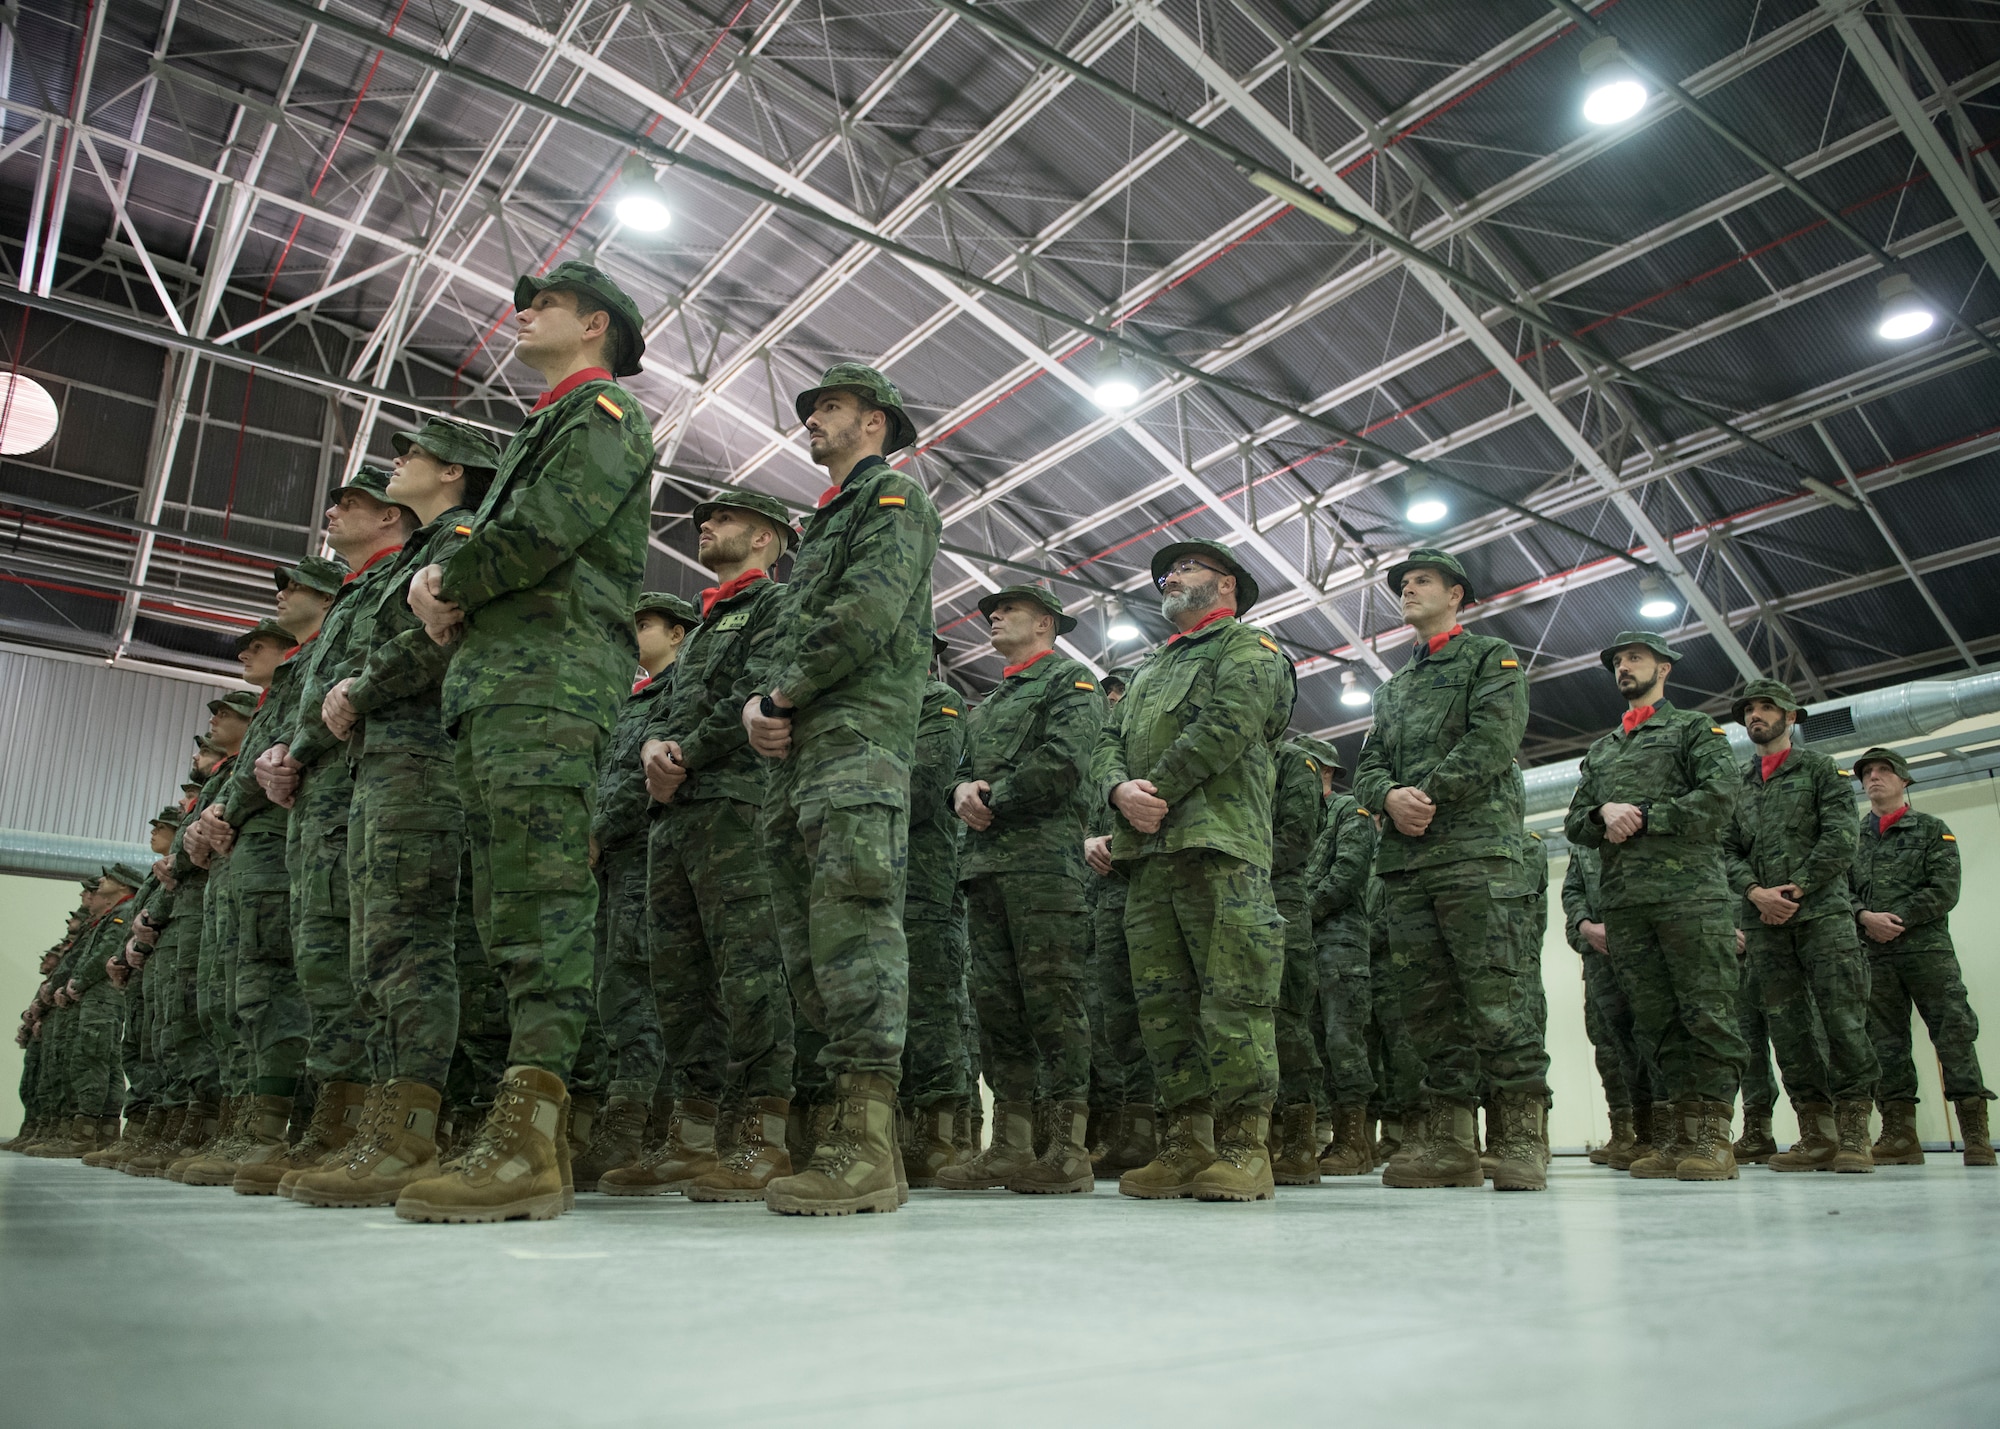 Members from the Spanish Patriot Unit stand in formation during their unit’s change of command ceremony, at Incirlik Air Base, Turkey, Jan. 16, 2019.